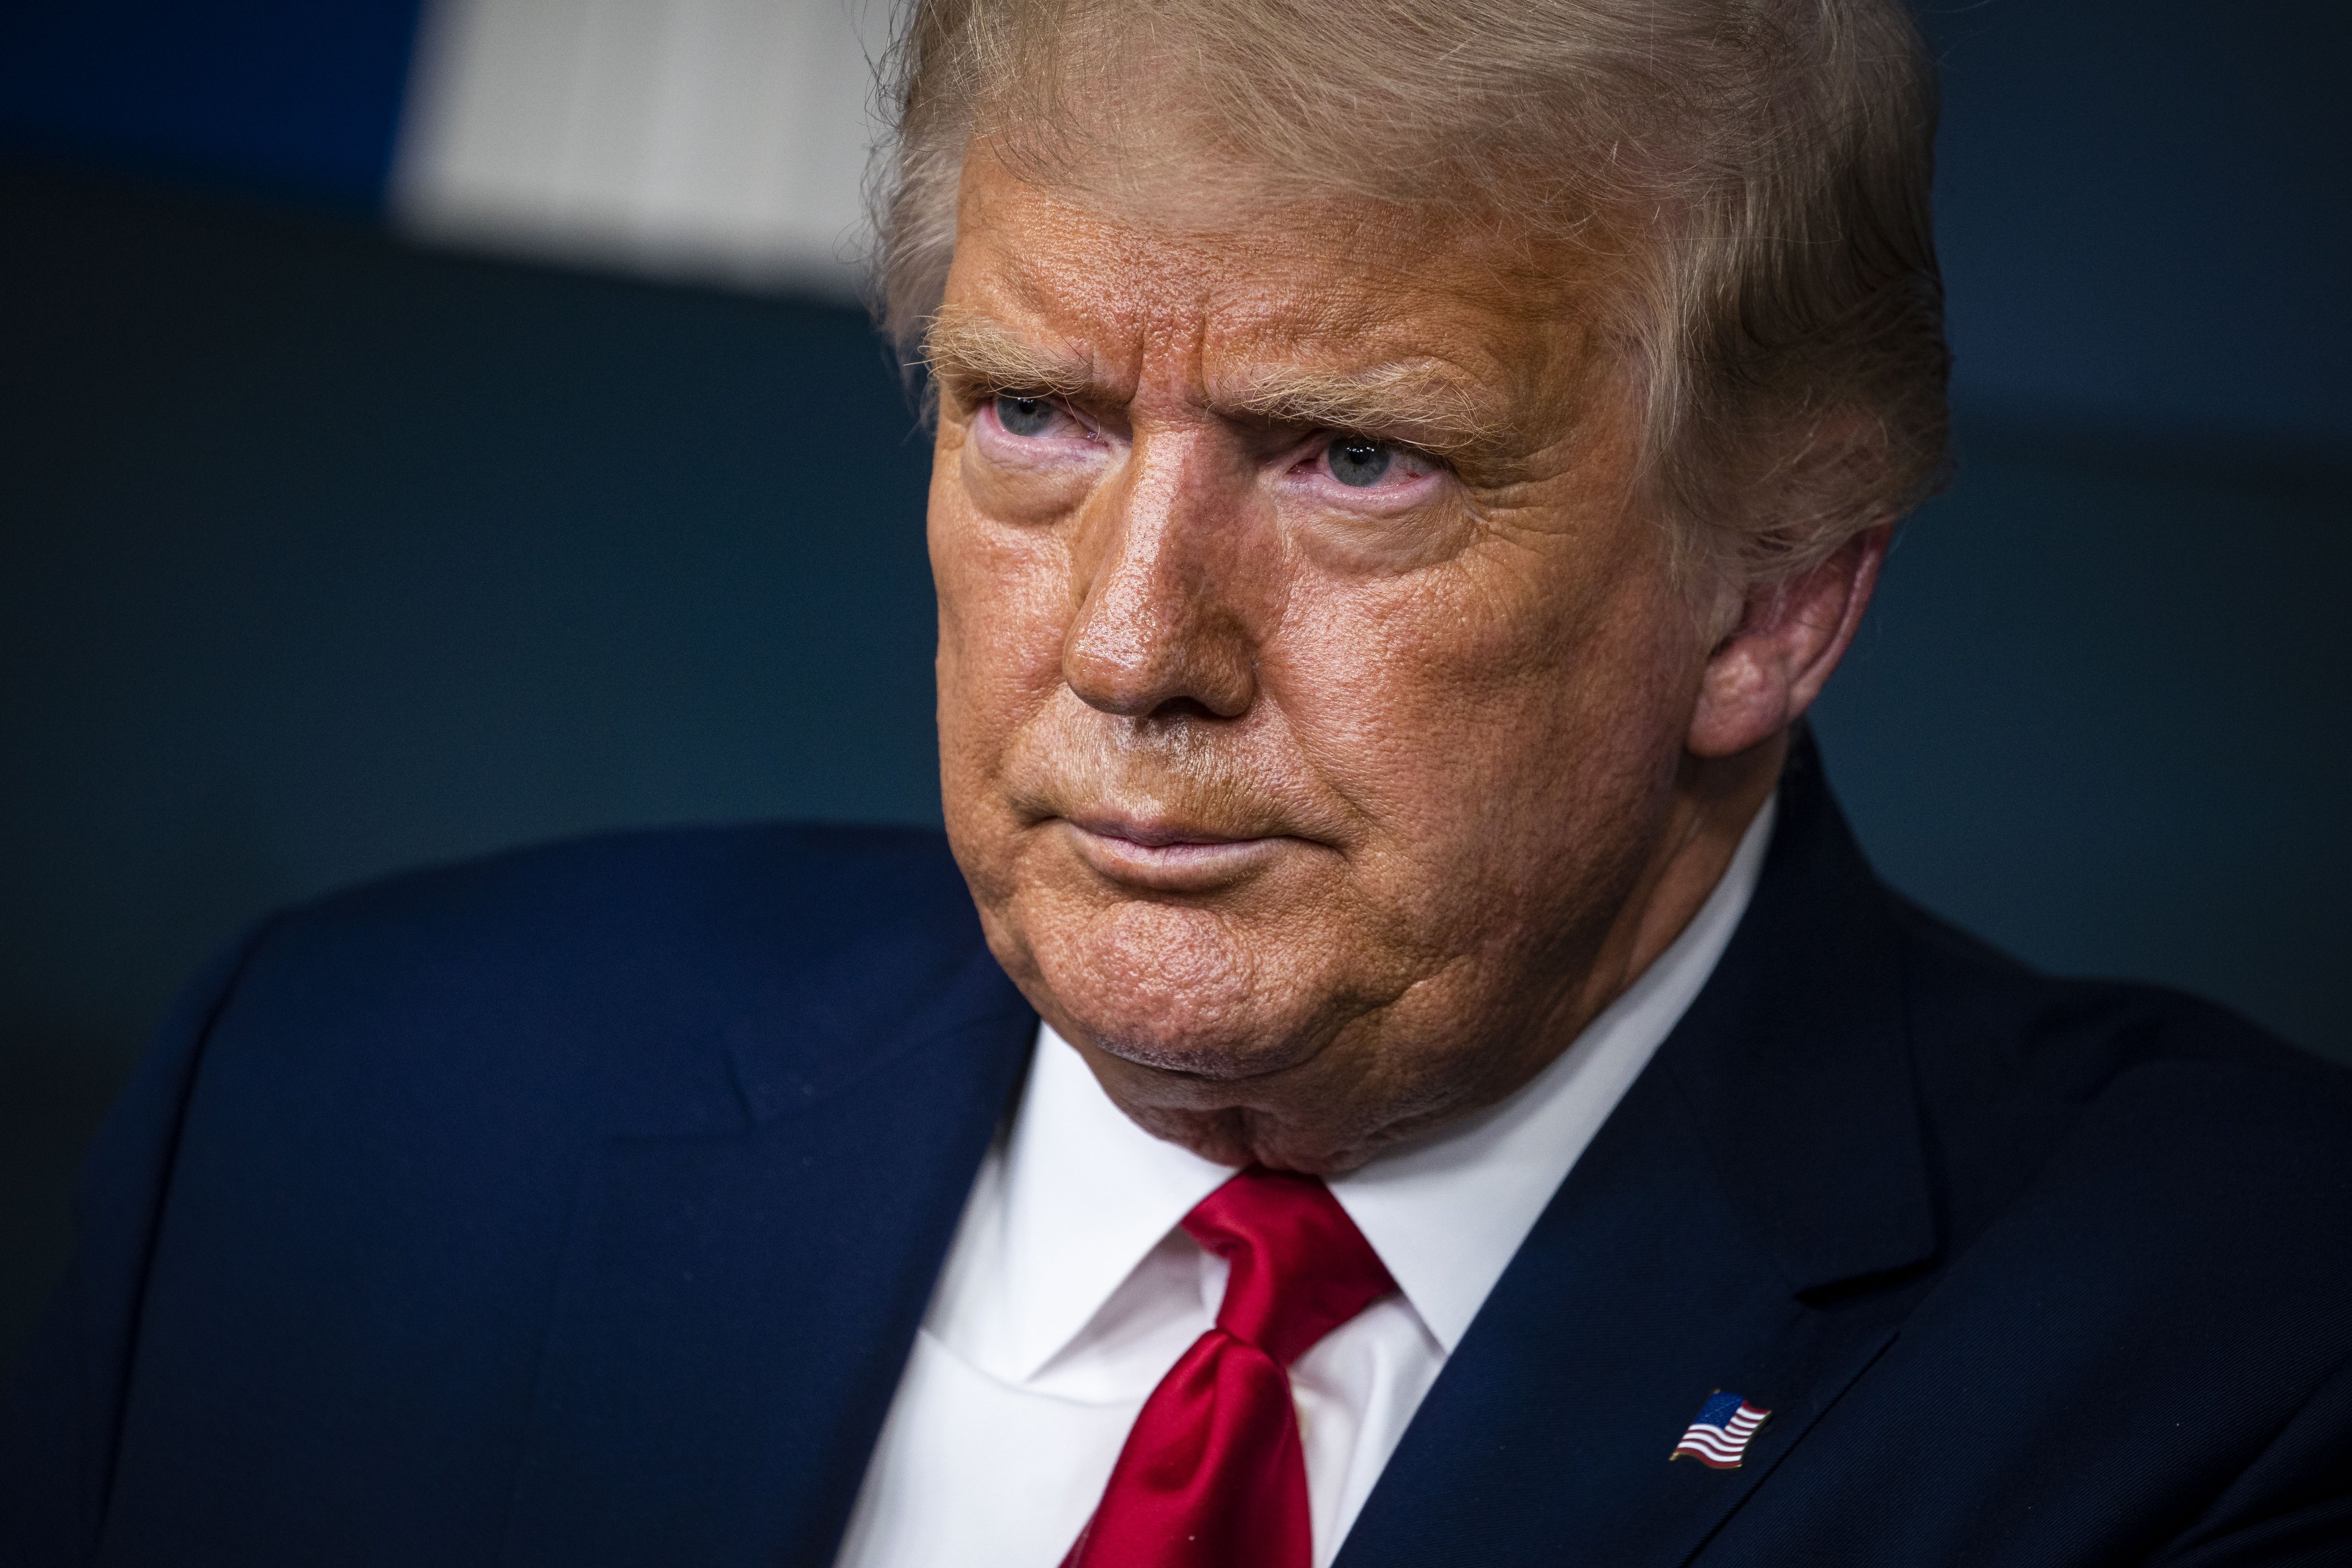 President Donald Trump speaks during a news conference in the James S. Brady Press Briefing Room at the White House in Washington, D.C., on Sept. 16, 2020. (Al Drago—Bloomberg/Getty Images)